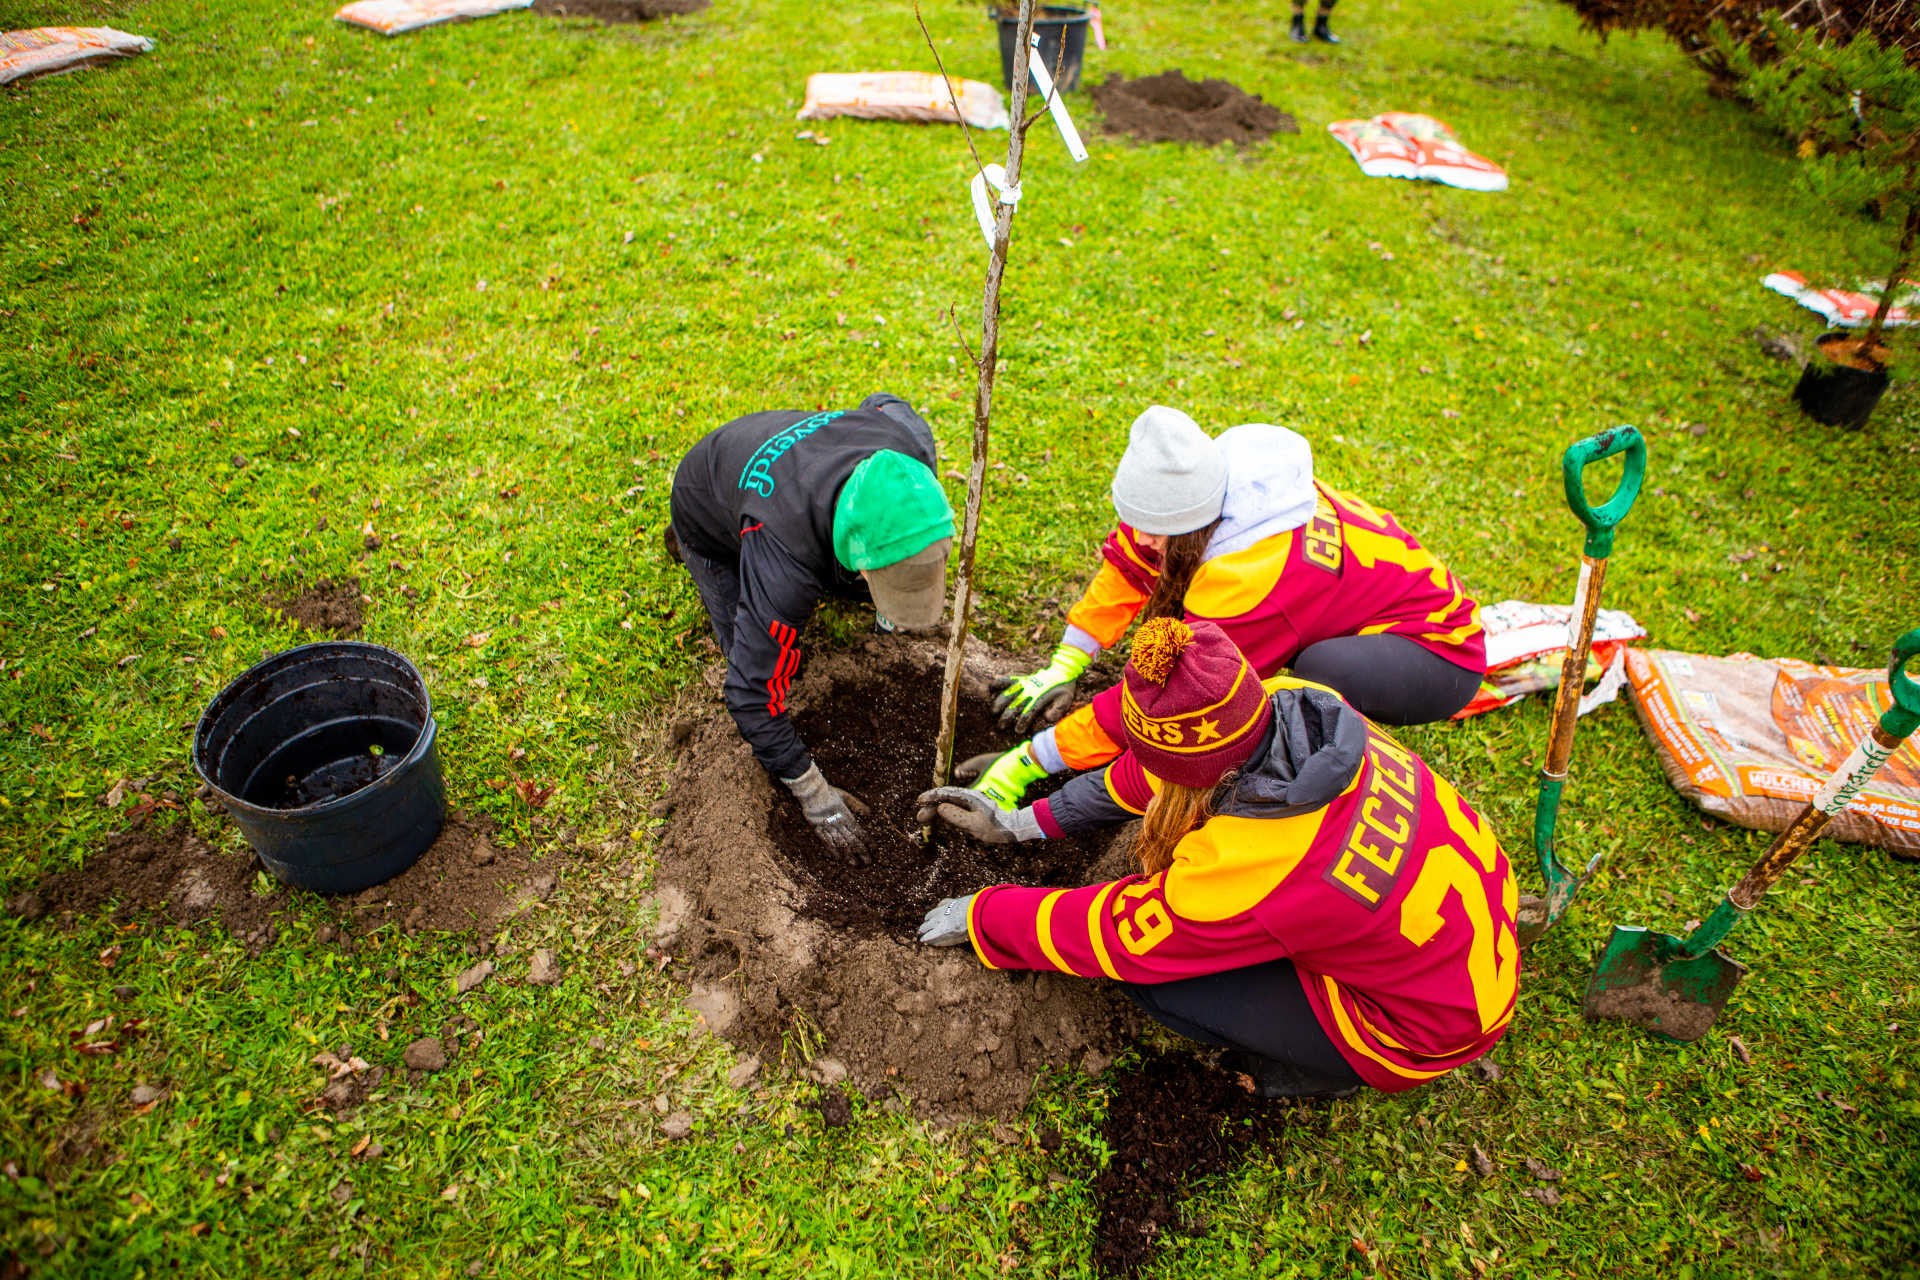 An aerial view of three people planting a tree in a round hole surrounded by green grass.